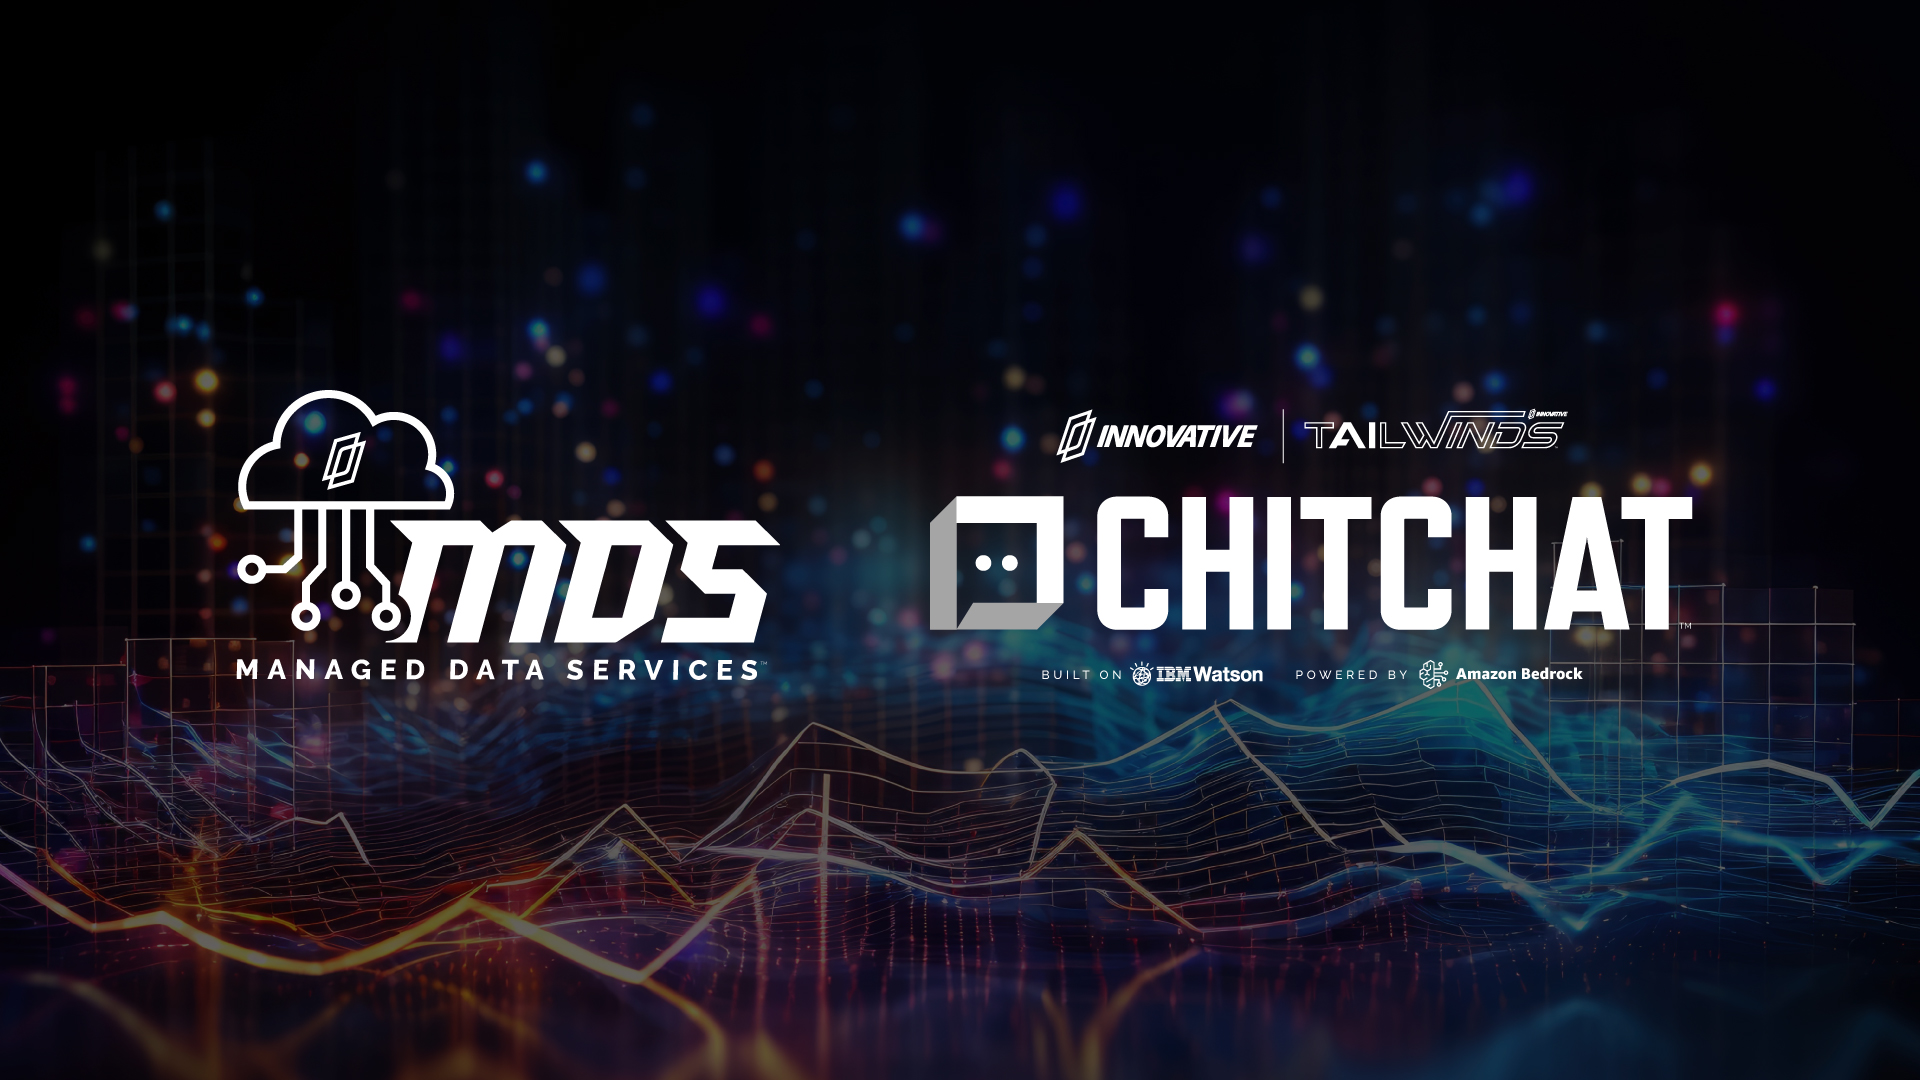 Managed GenAI is here and Innovative is leading the pack with Tailwinds ChitChat and MDS